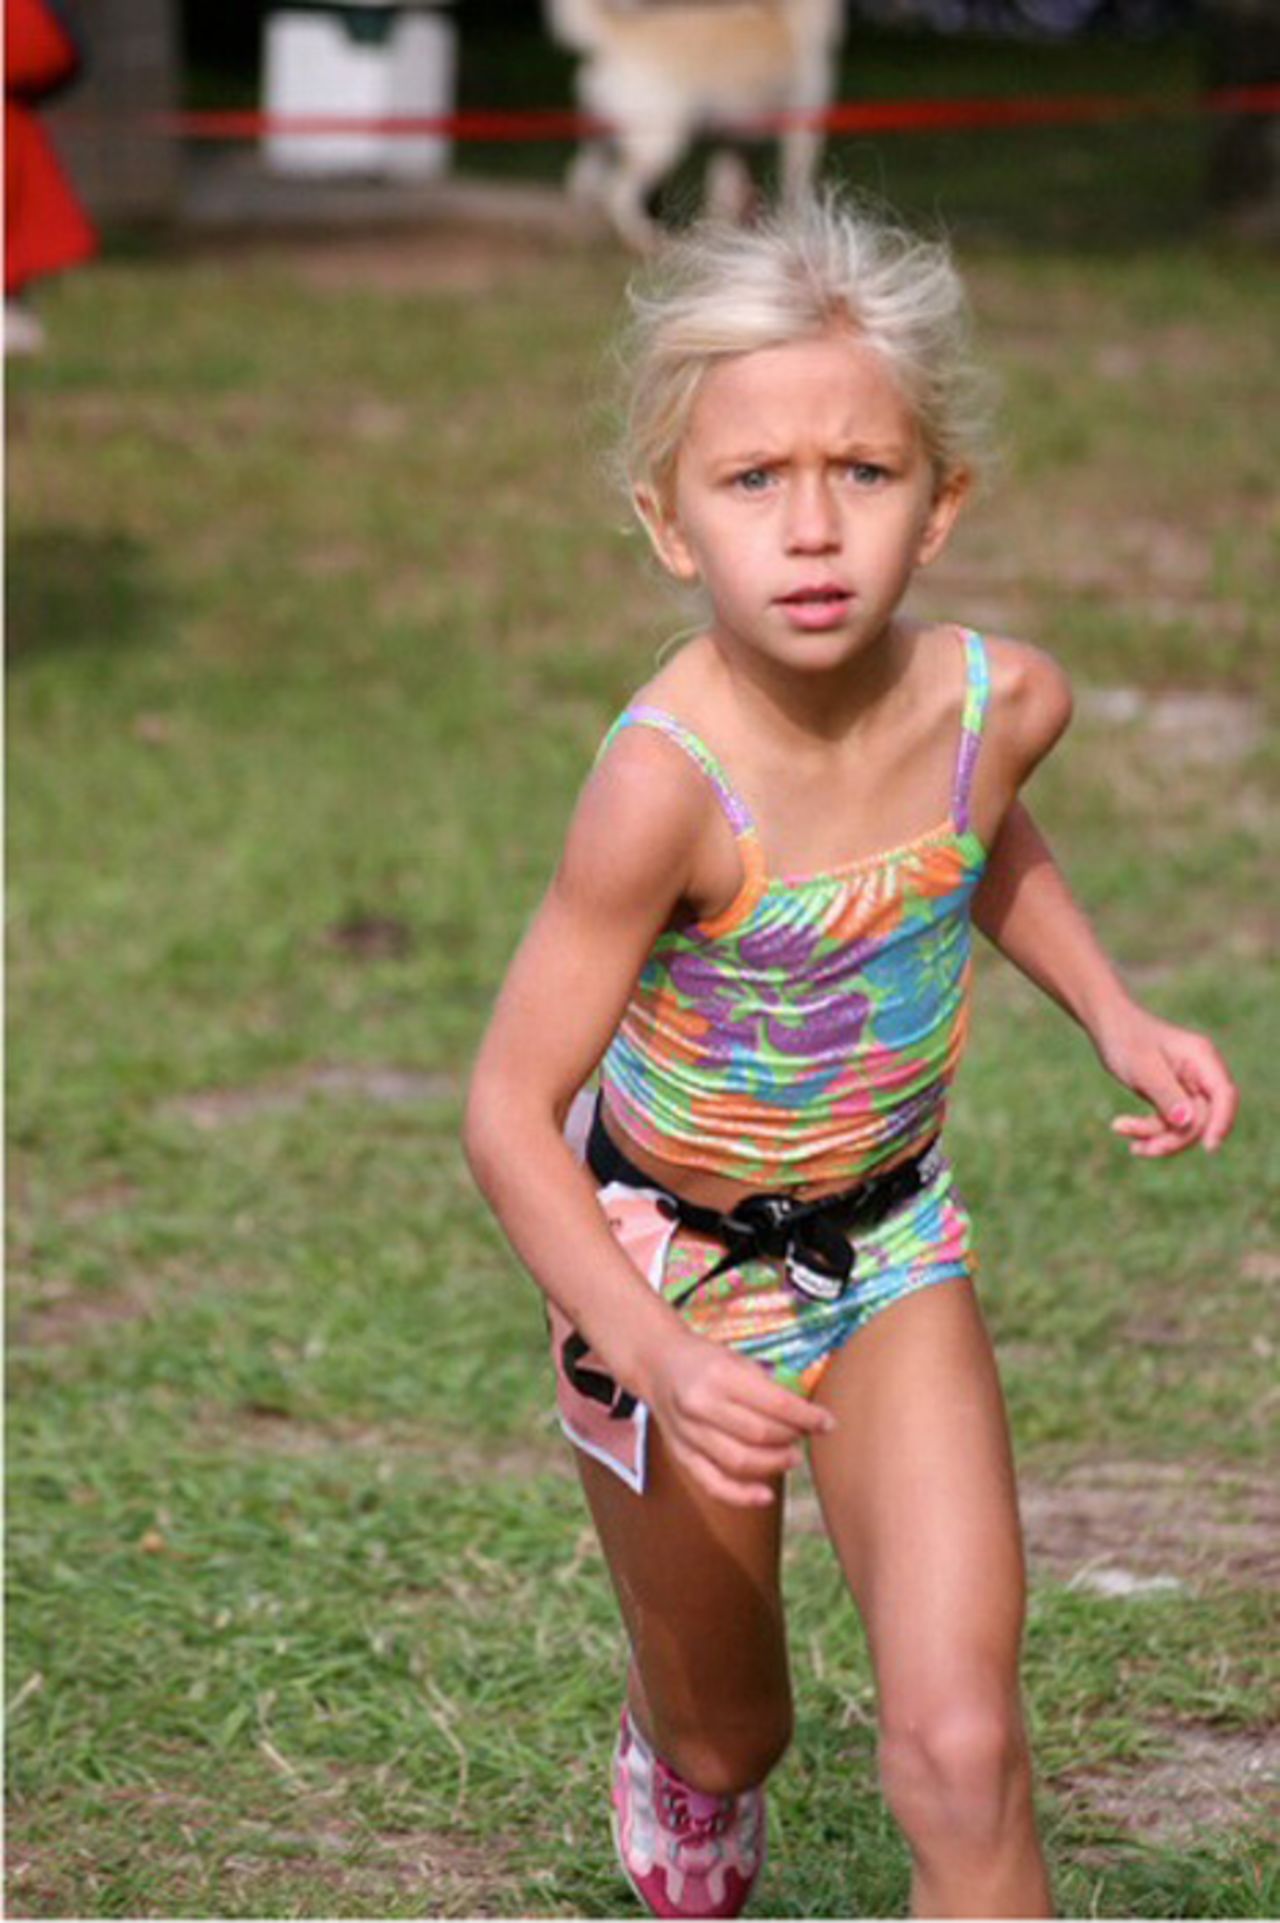 Winter completed her first triathlon at the age of 5. By the age of 9, she was competing in her first Olympic-distance triathlon. 